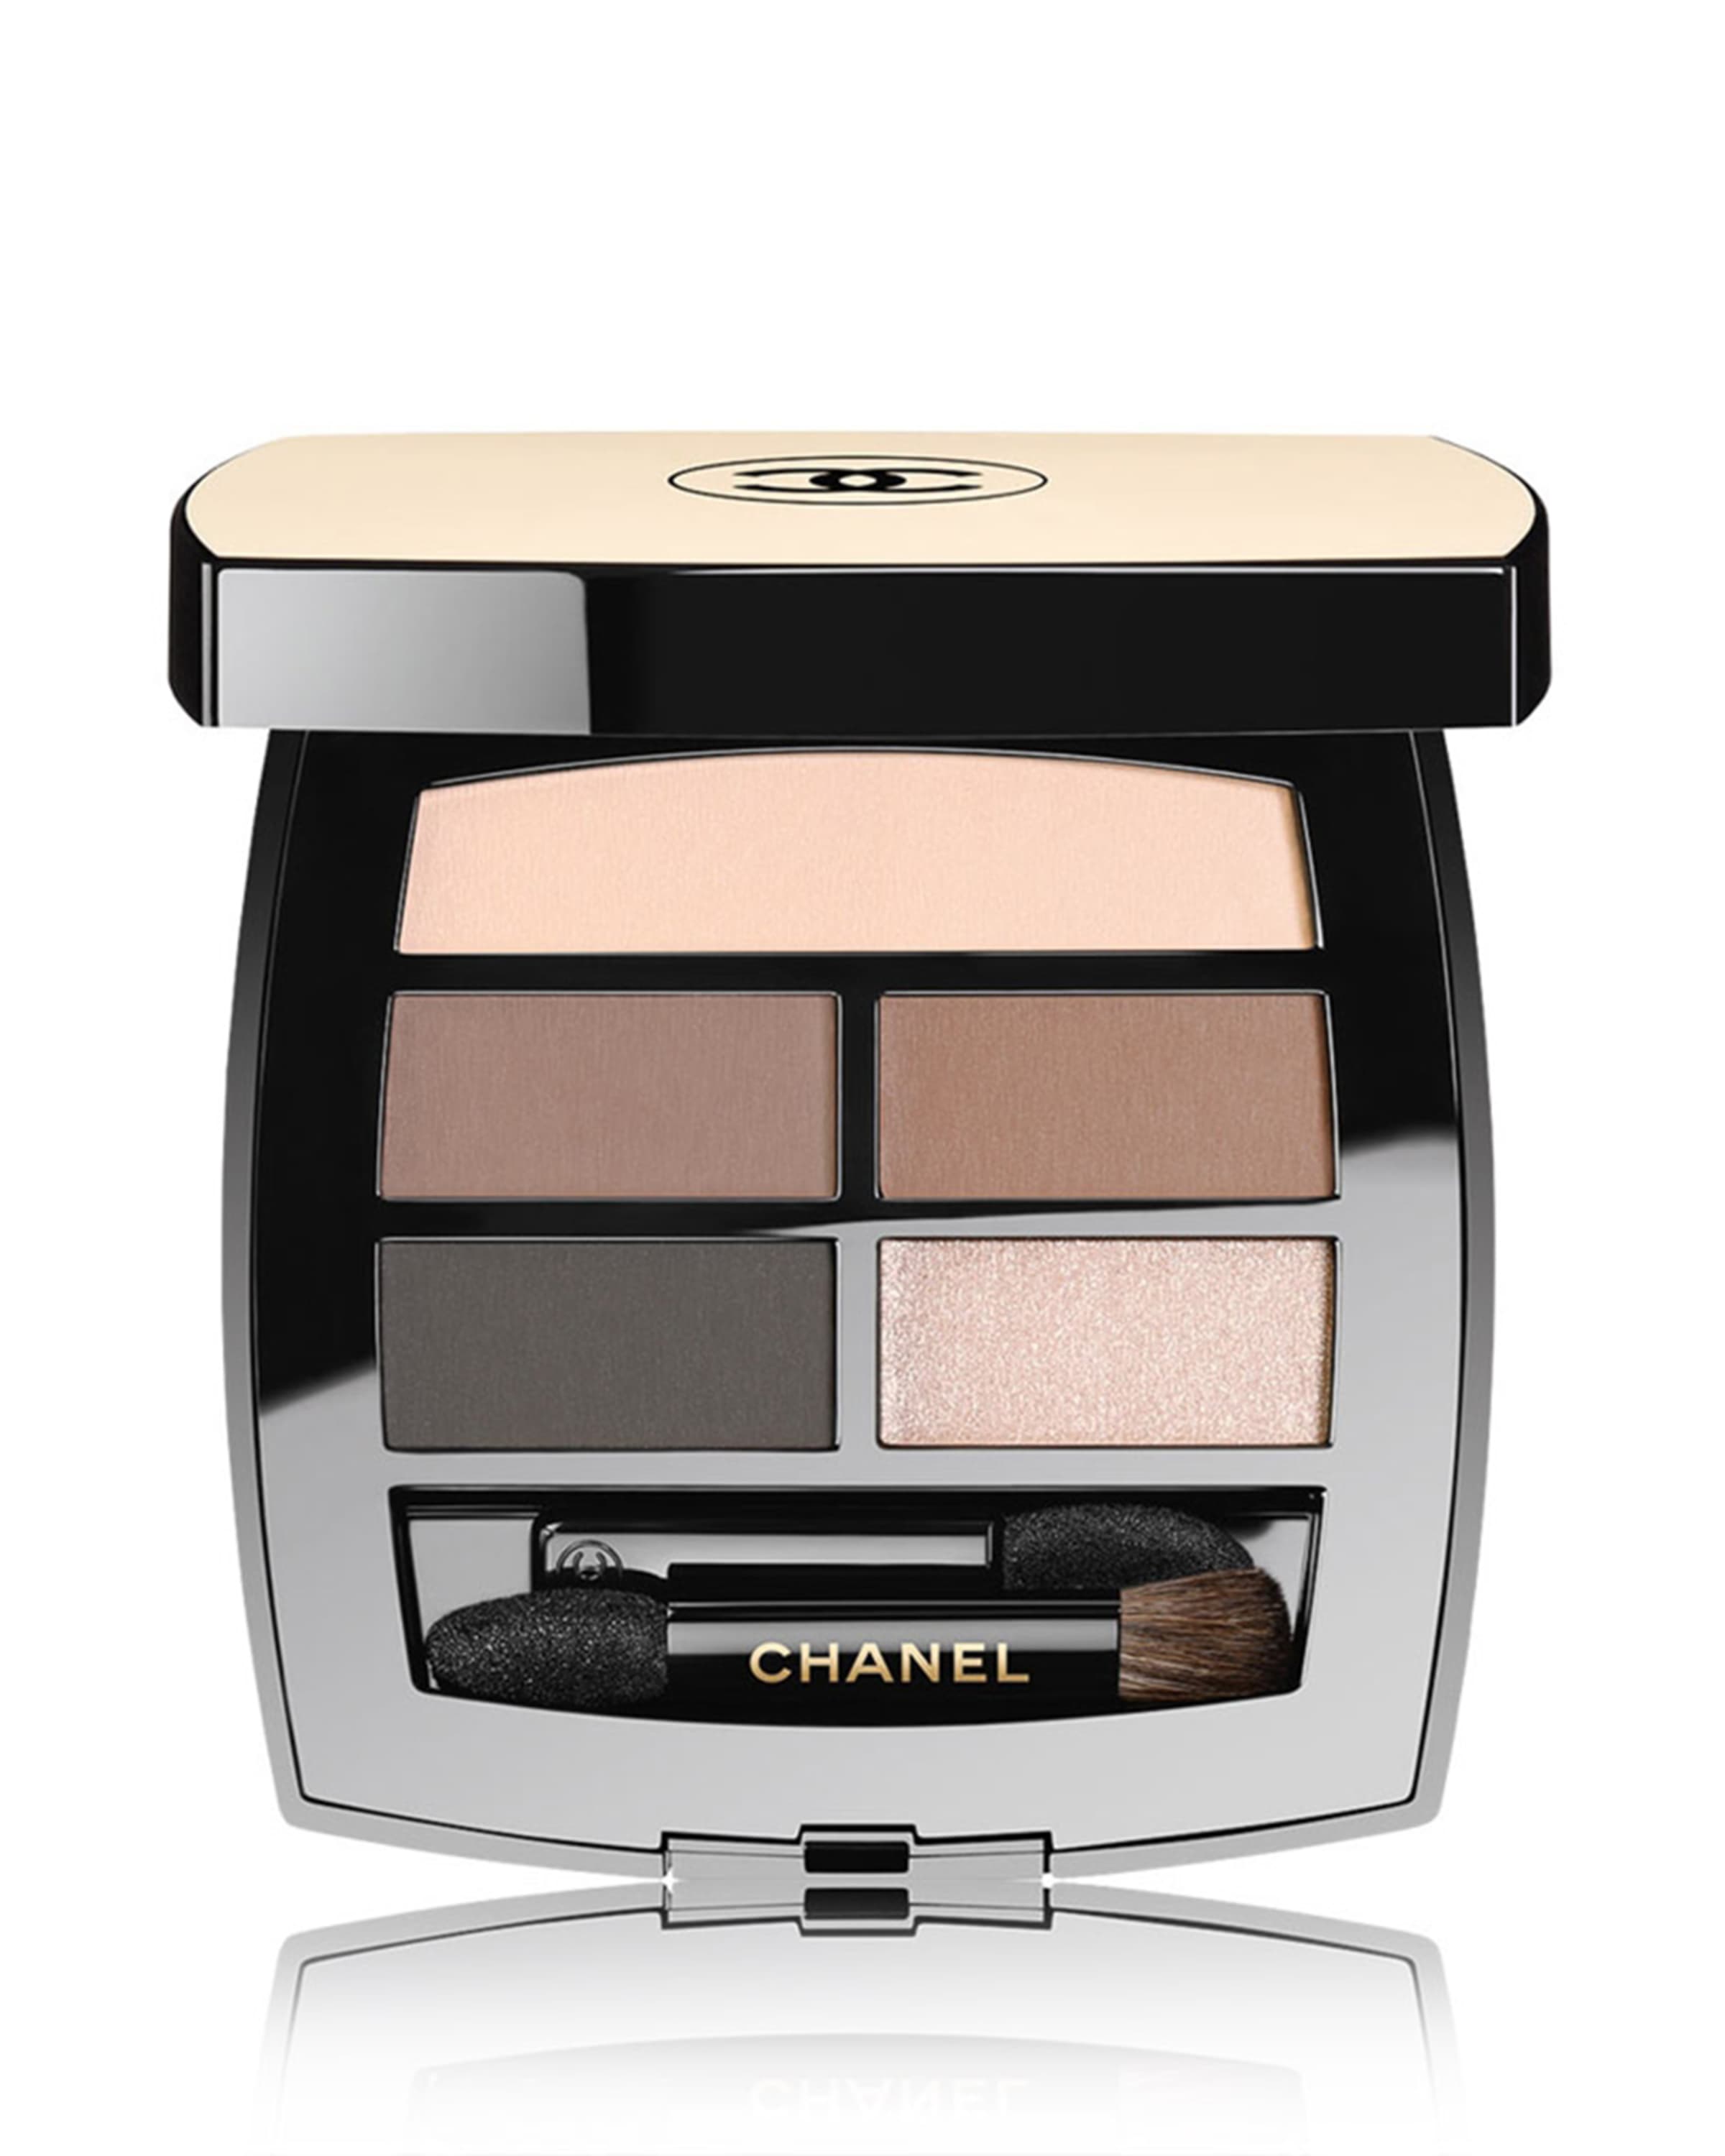 CHANEL LES BEIGES Healthy Glow Natural Eyeshadow Palette